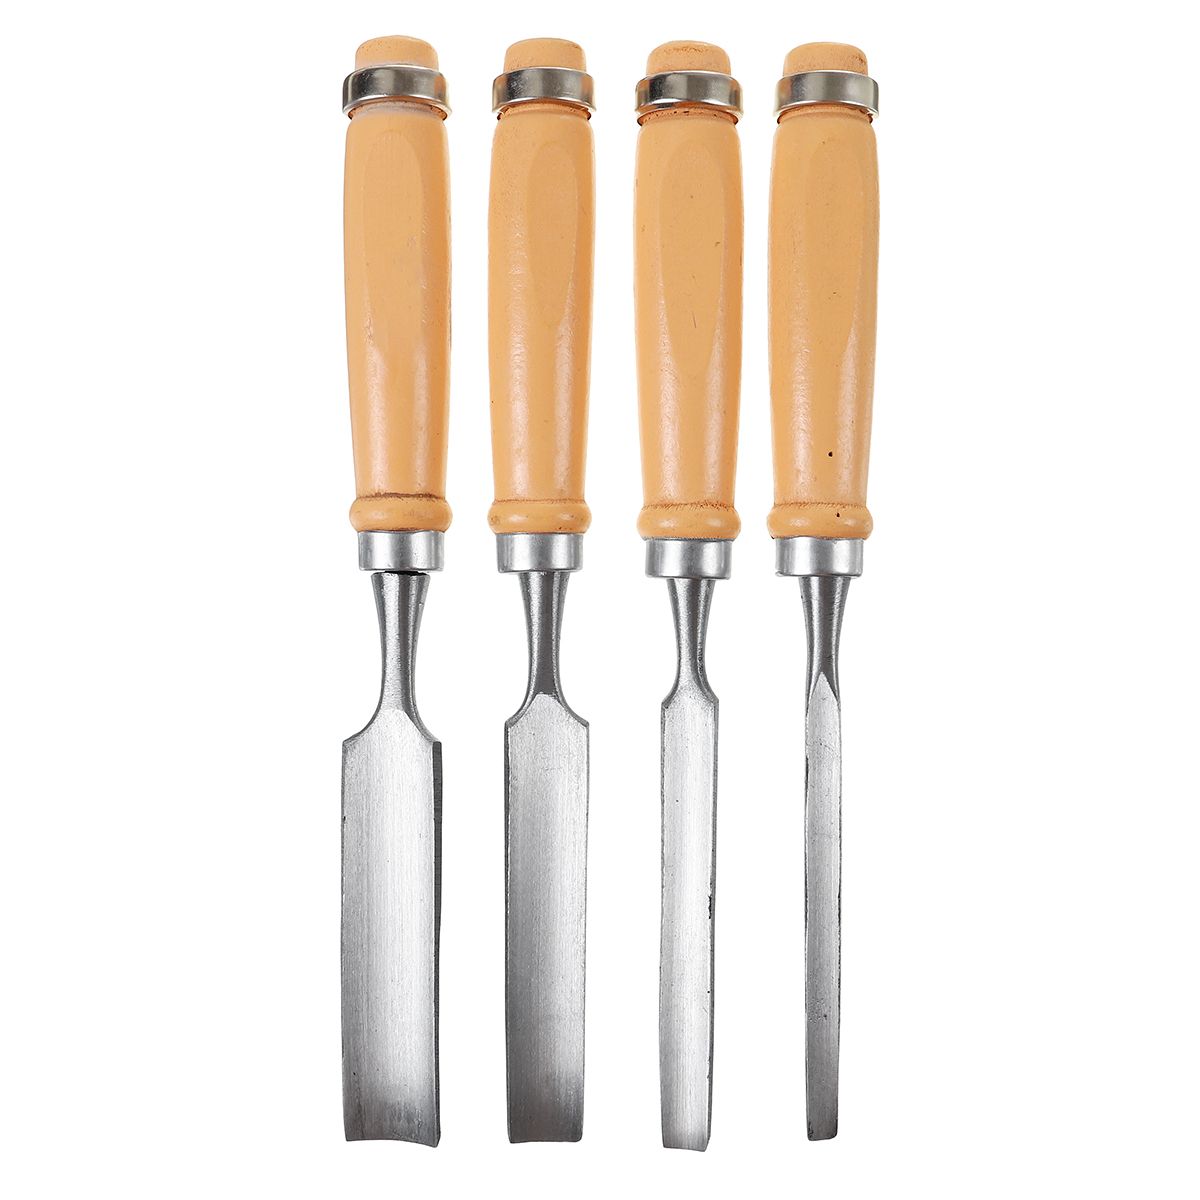 4Pcs-Wood-Carving-Roughing-Hand-Chisel-Tool-Kit-Set-Working-Professional-Gouges-1018458